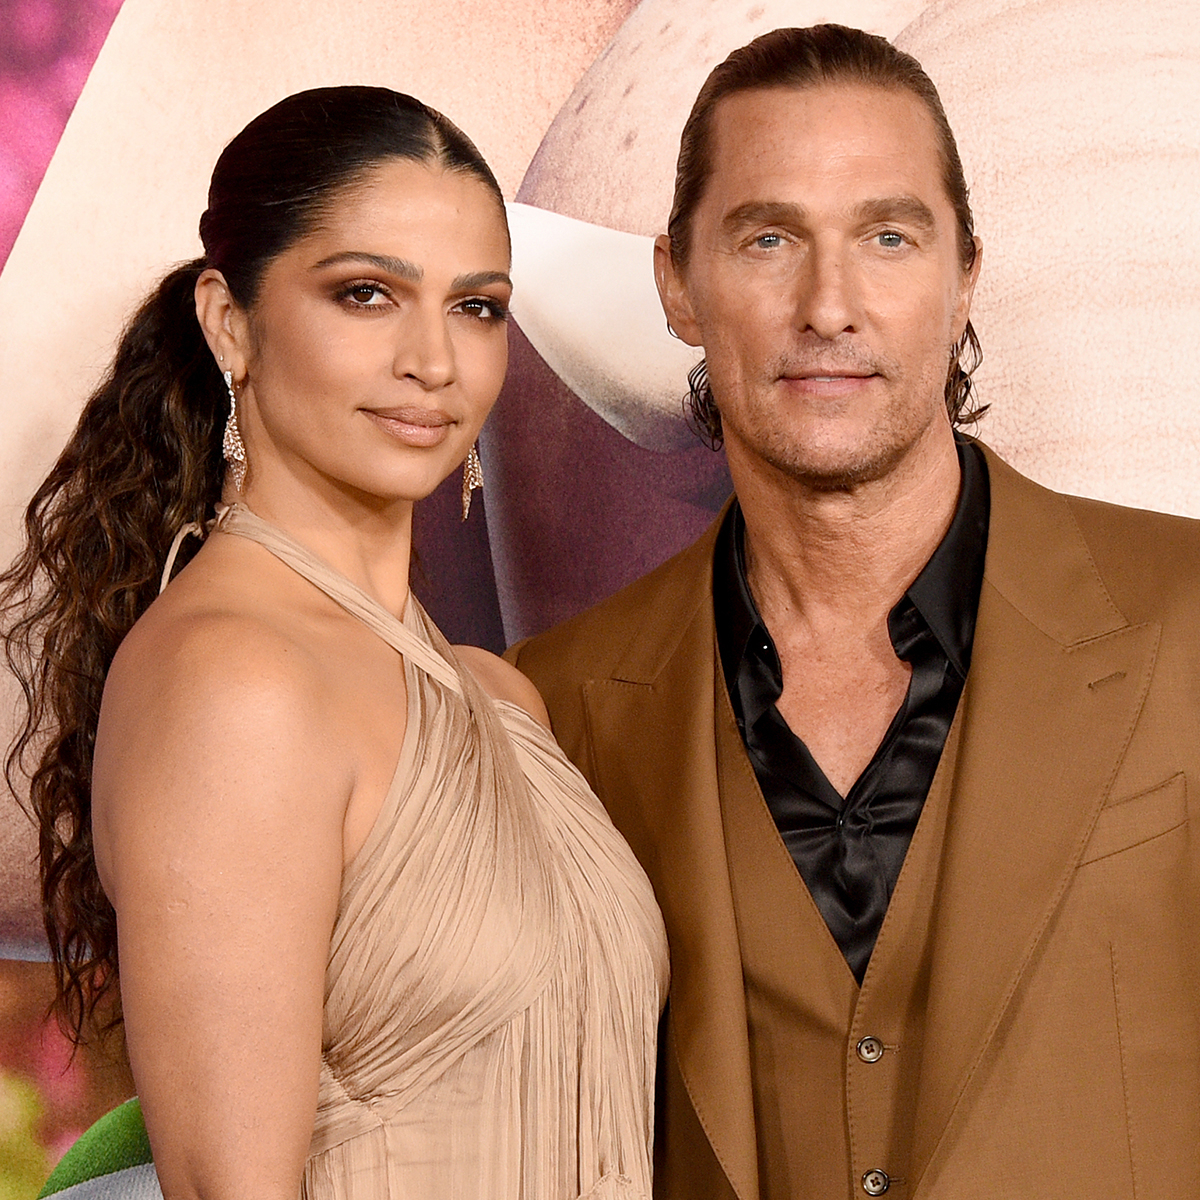 https://akns-images.eonline.com/eol_images/Entire_Site/2023016/rs_1200x1200-230116110827-1200-Camila-Alves-and-Matthew-McConaughey.cm.11623.jpg?fit=around%7C300:300&output-quality=90&crop=300:300;center,top